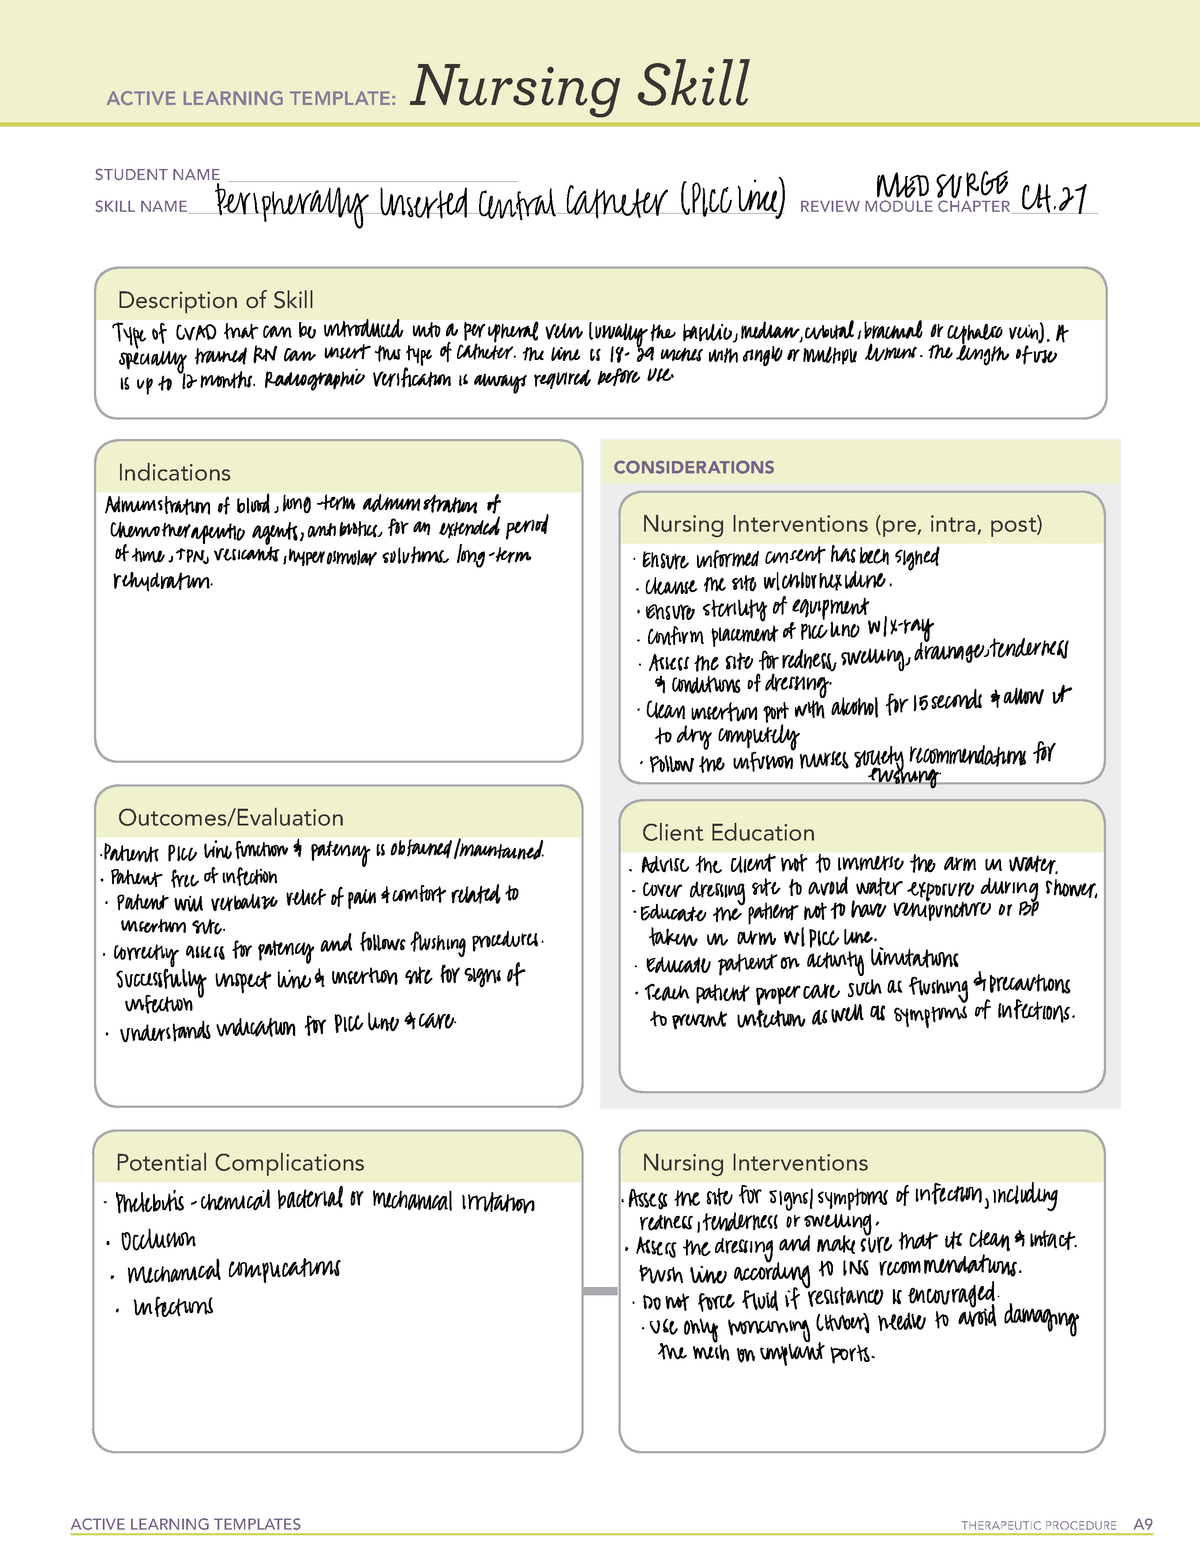 Nursing Skill Active Learning Template